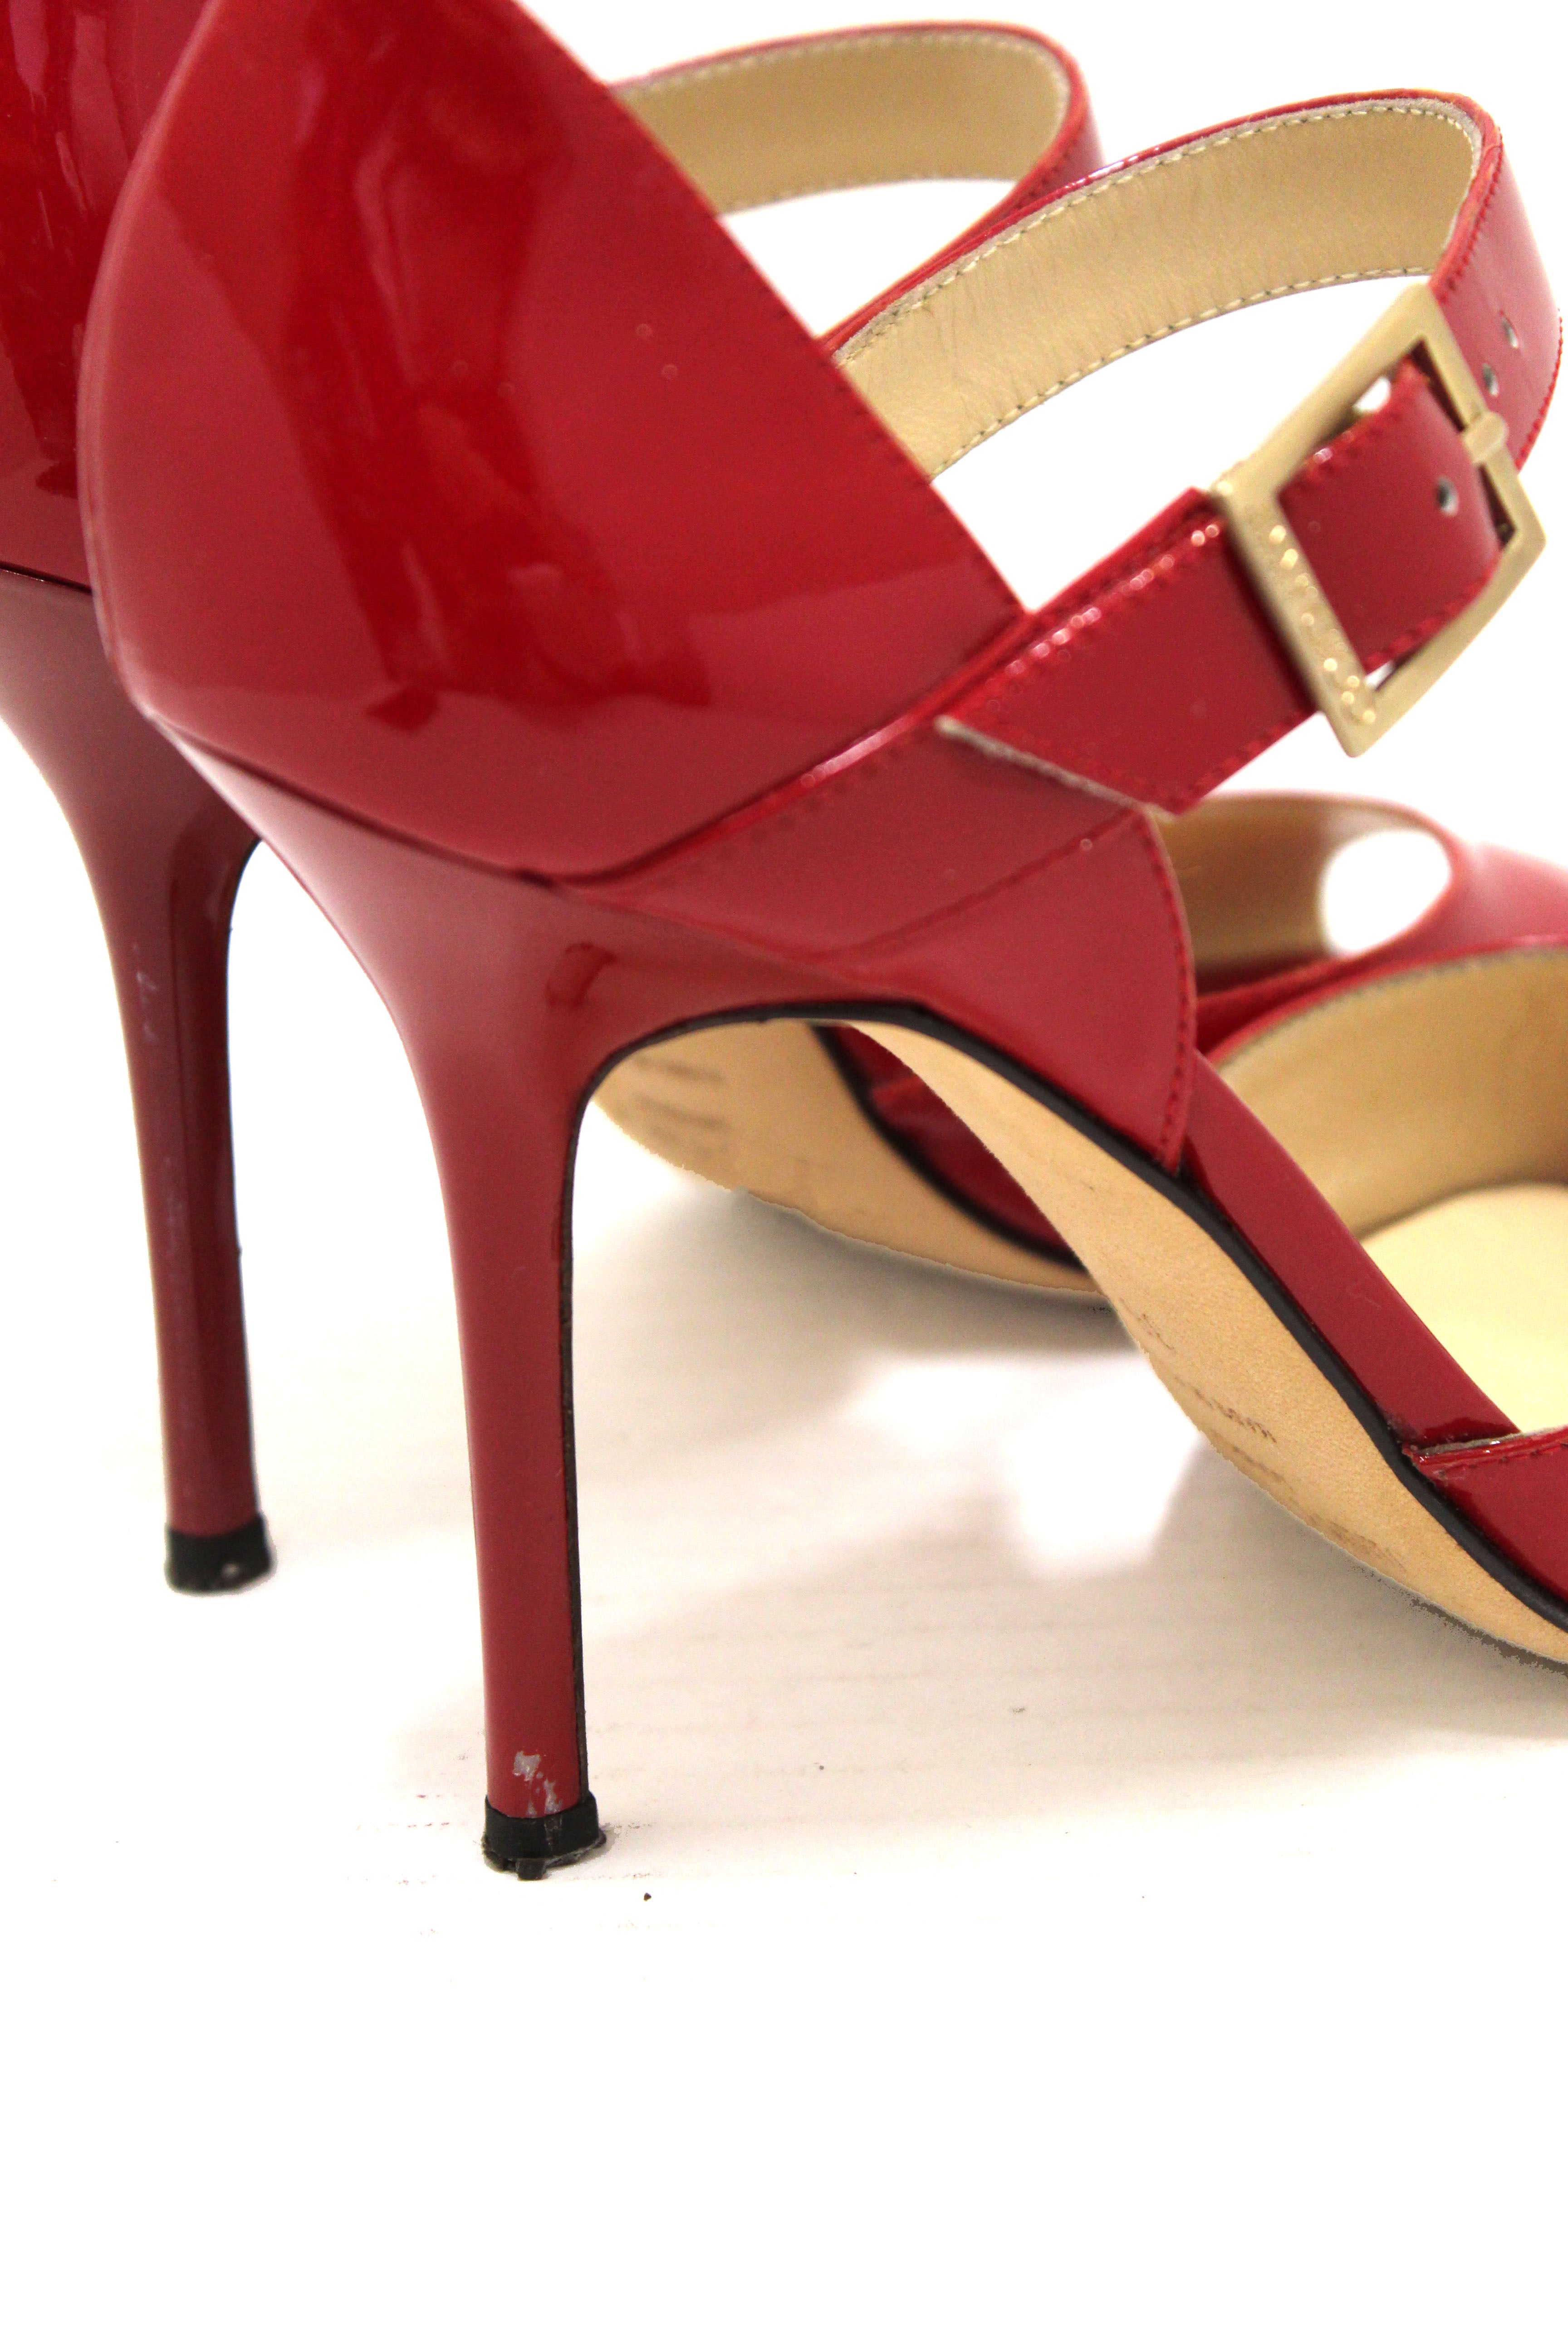 Jimmy Choo Red Patent Heels Size 37 Used - BrandConscious Authentics